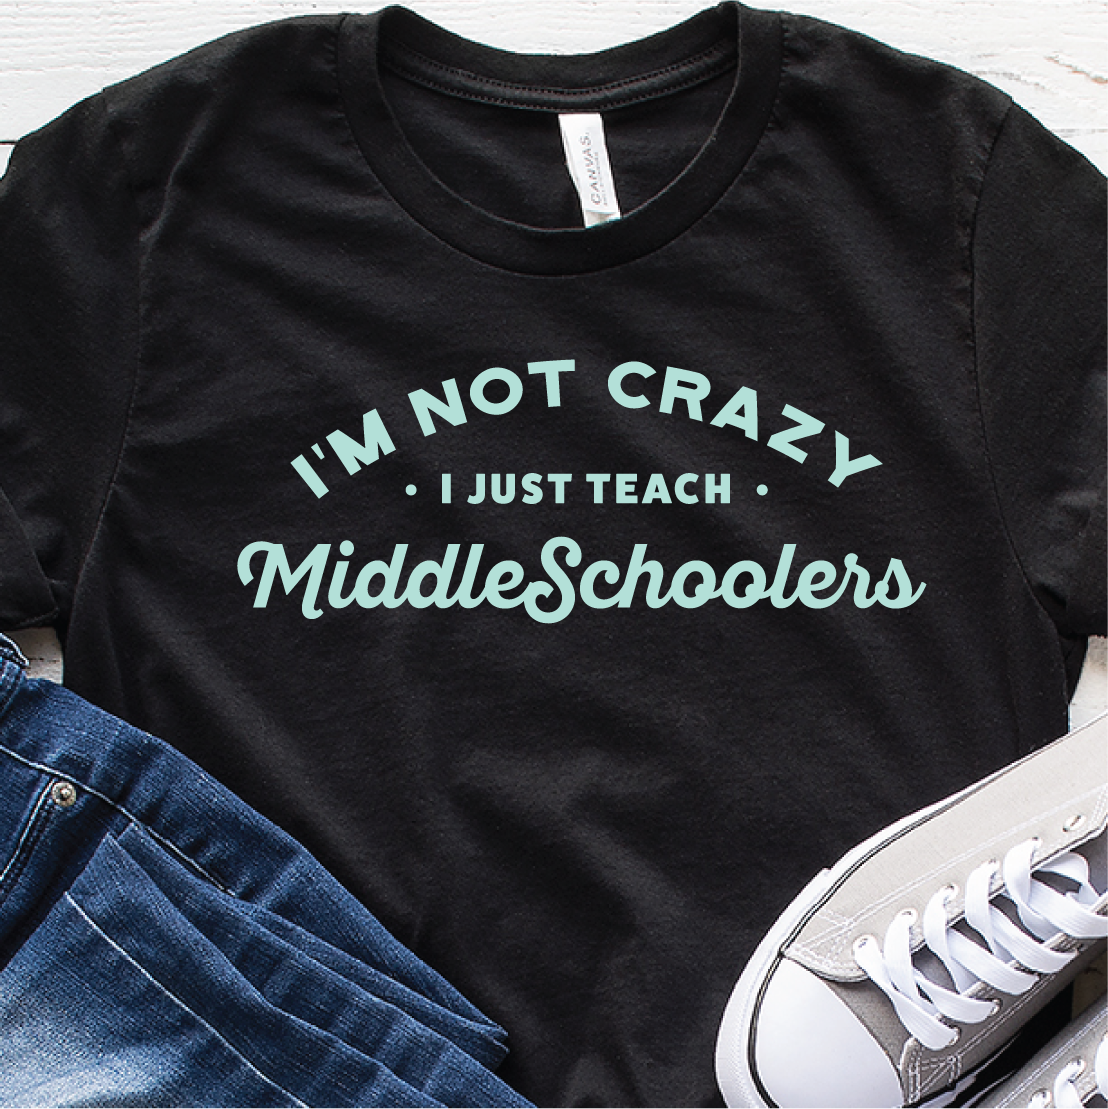 "I'm not crazy. I just teach Middle Schoolers." Unisex Tee